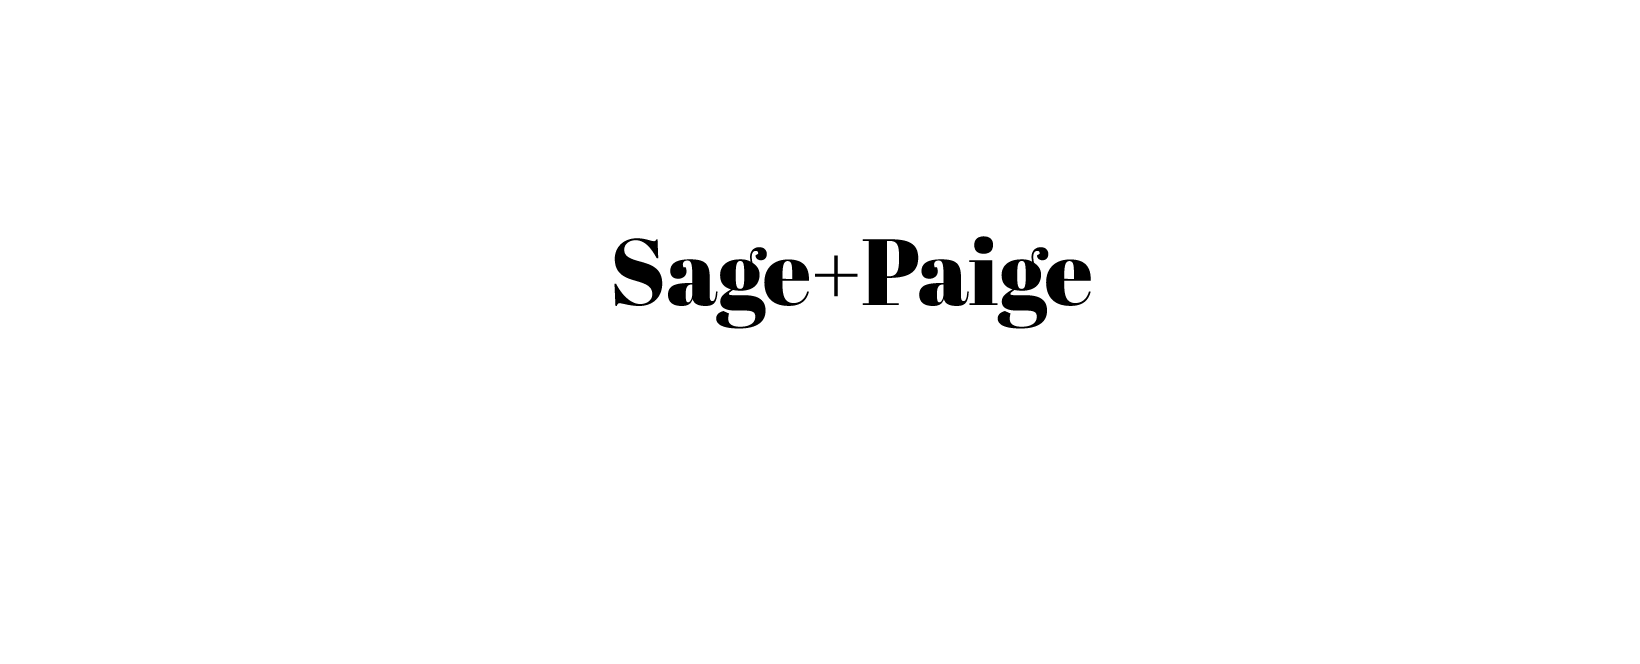 Sage and Paige Discount Codes 2022